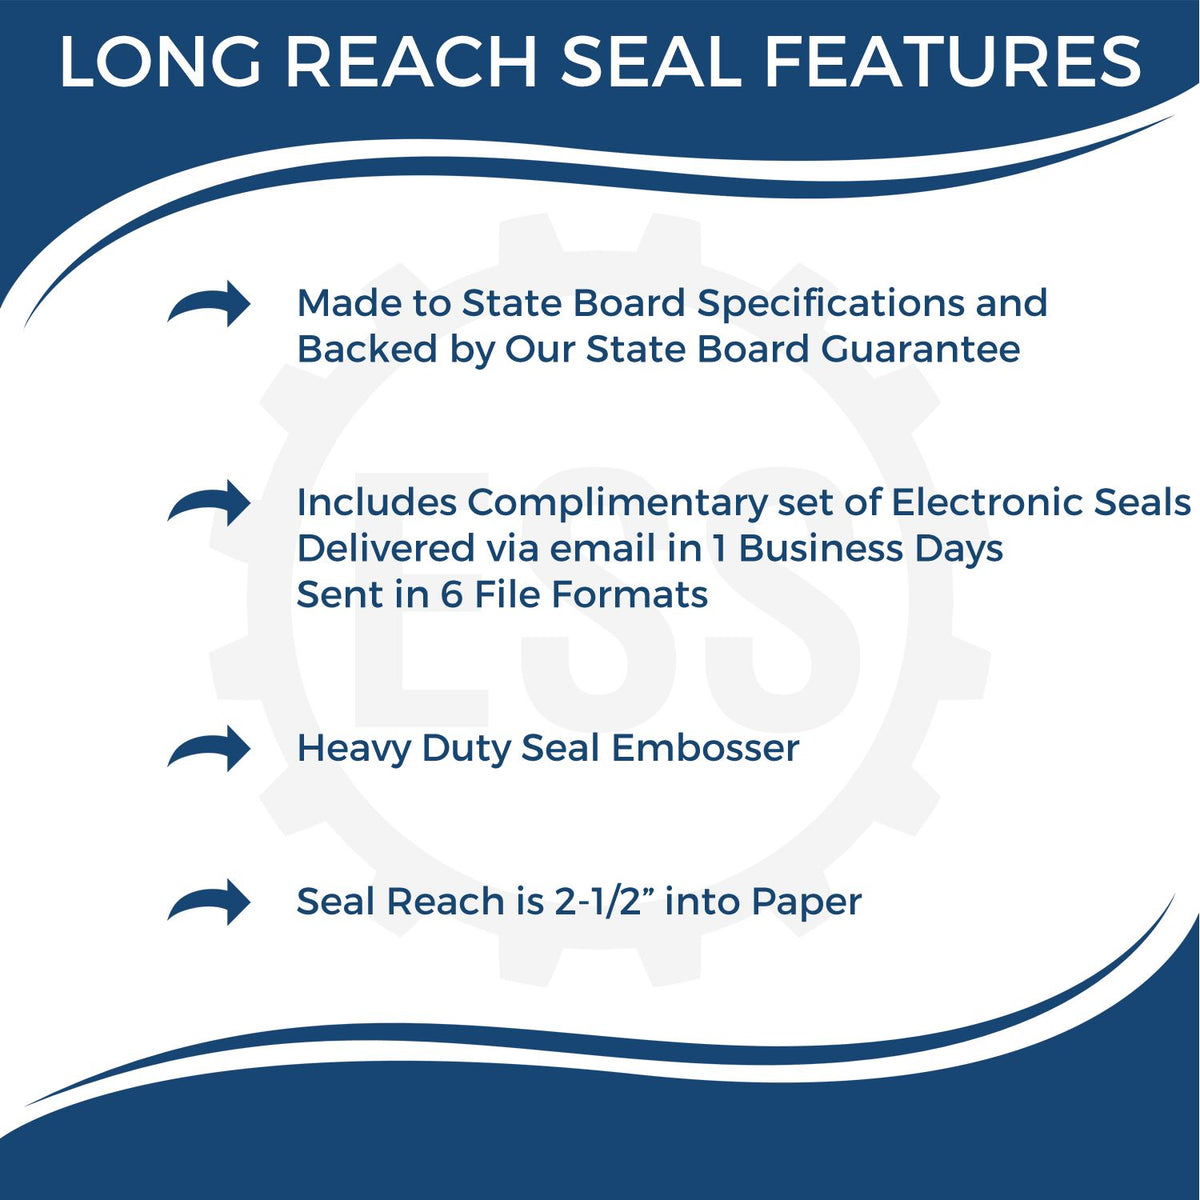 A picture of an infographic highlighting the selling points for the Long Reach Iowa PE Seal